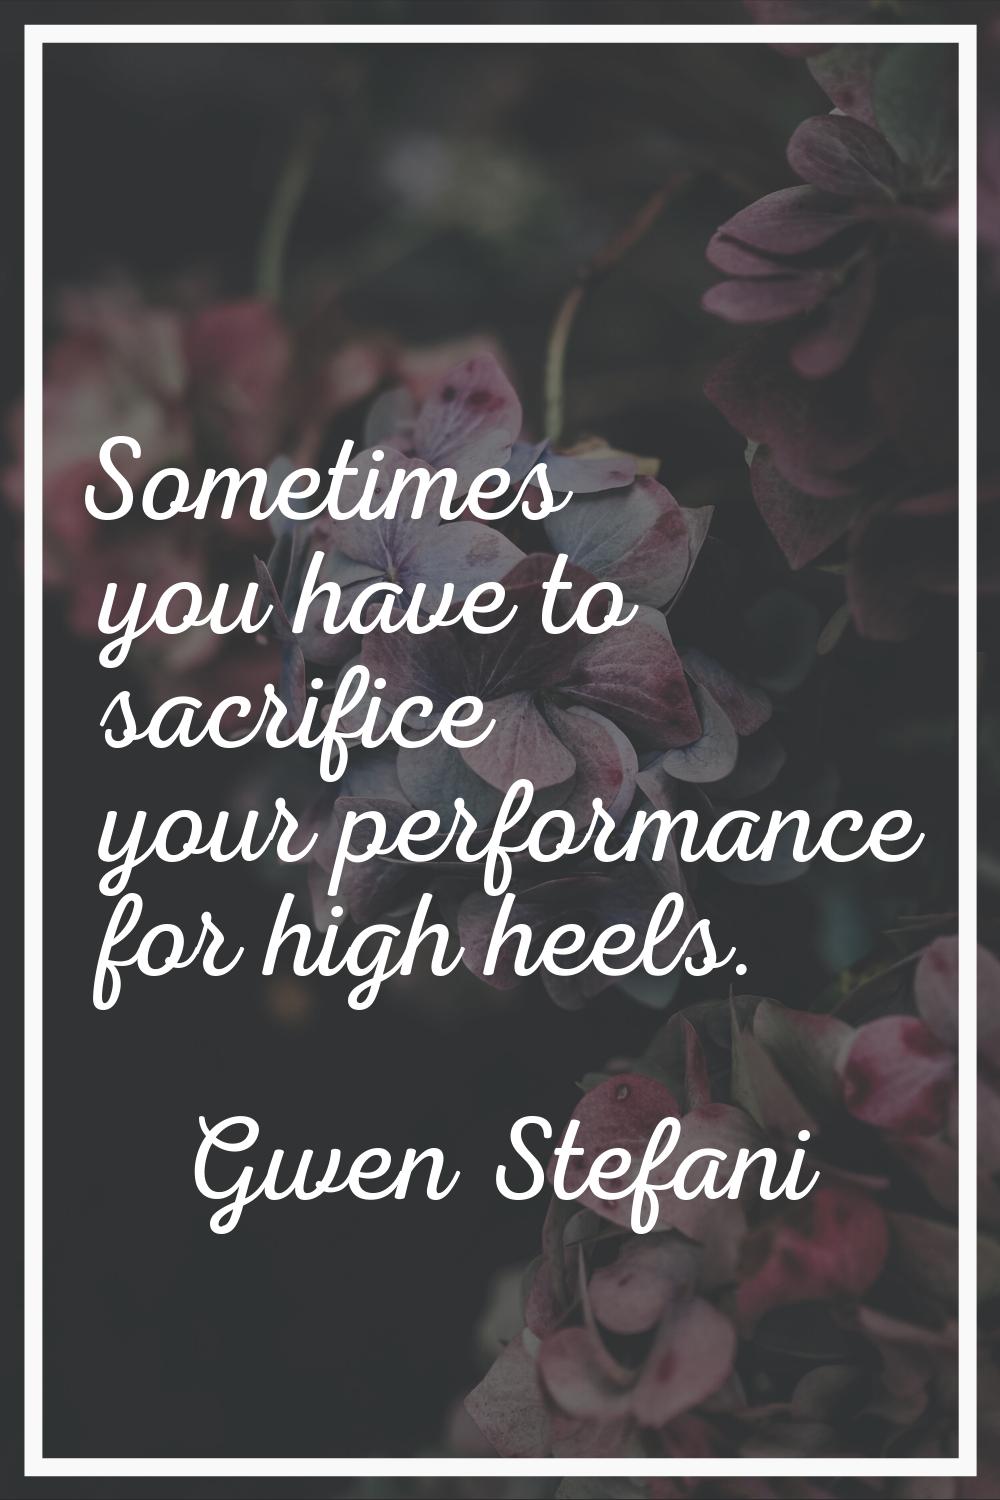 Sometimes you have to sacrifice your performance for high heels.